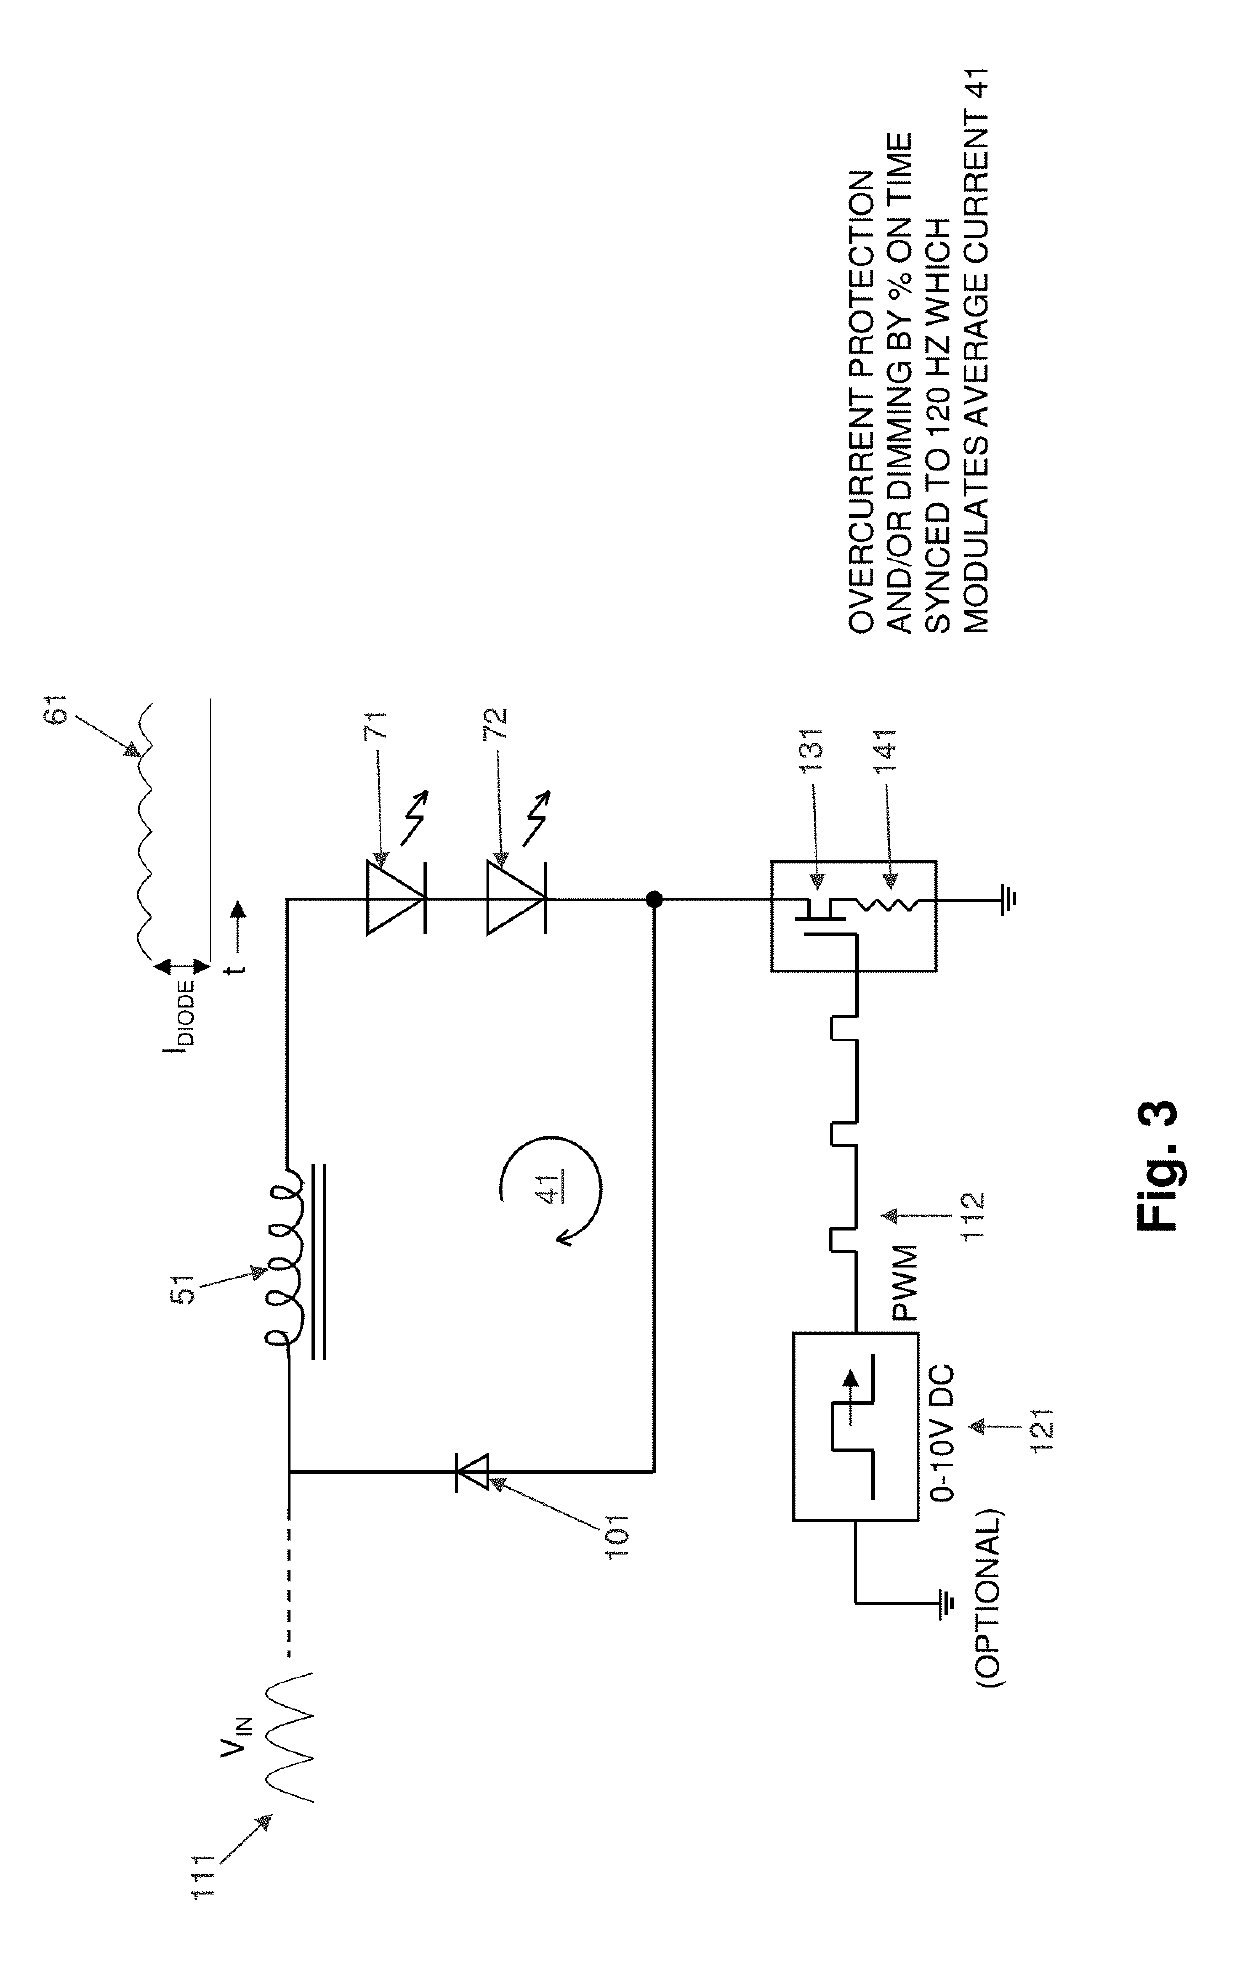 Method of using a high reactance, inductor transformer to passively reduce flickering, correct power factor, control LED current, and eliminate radio frequency interference (RFI) for a current-driven LED lighting array intended for use in streetlight mesh networks